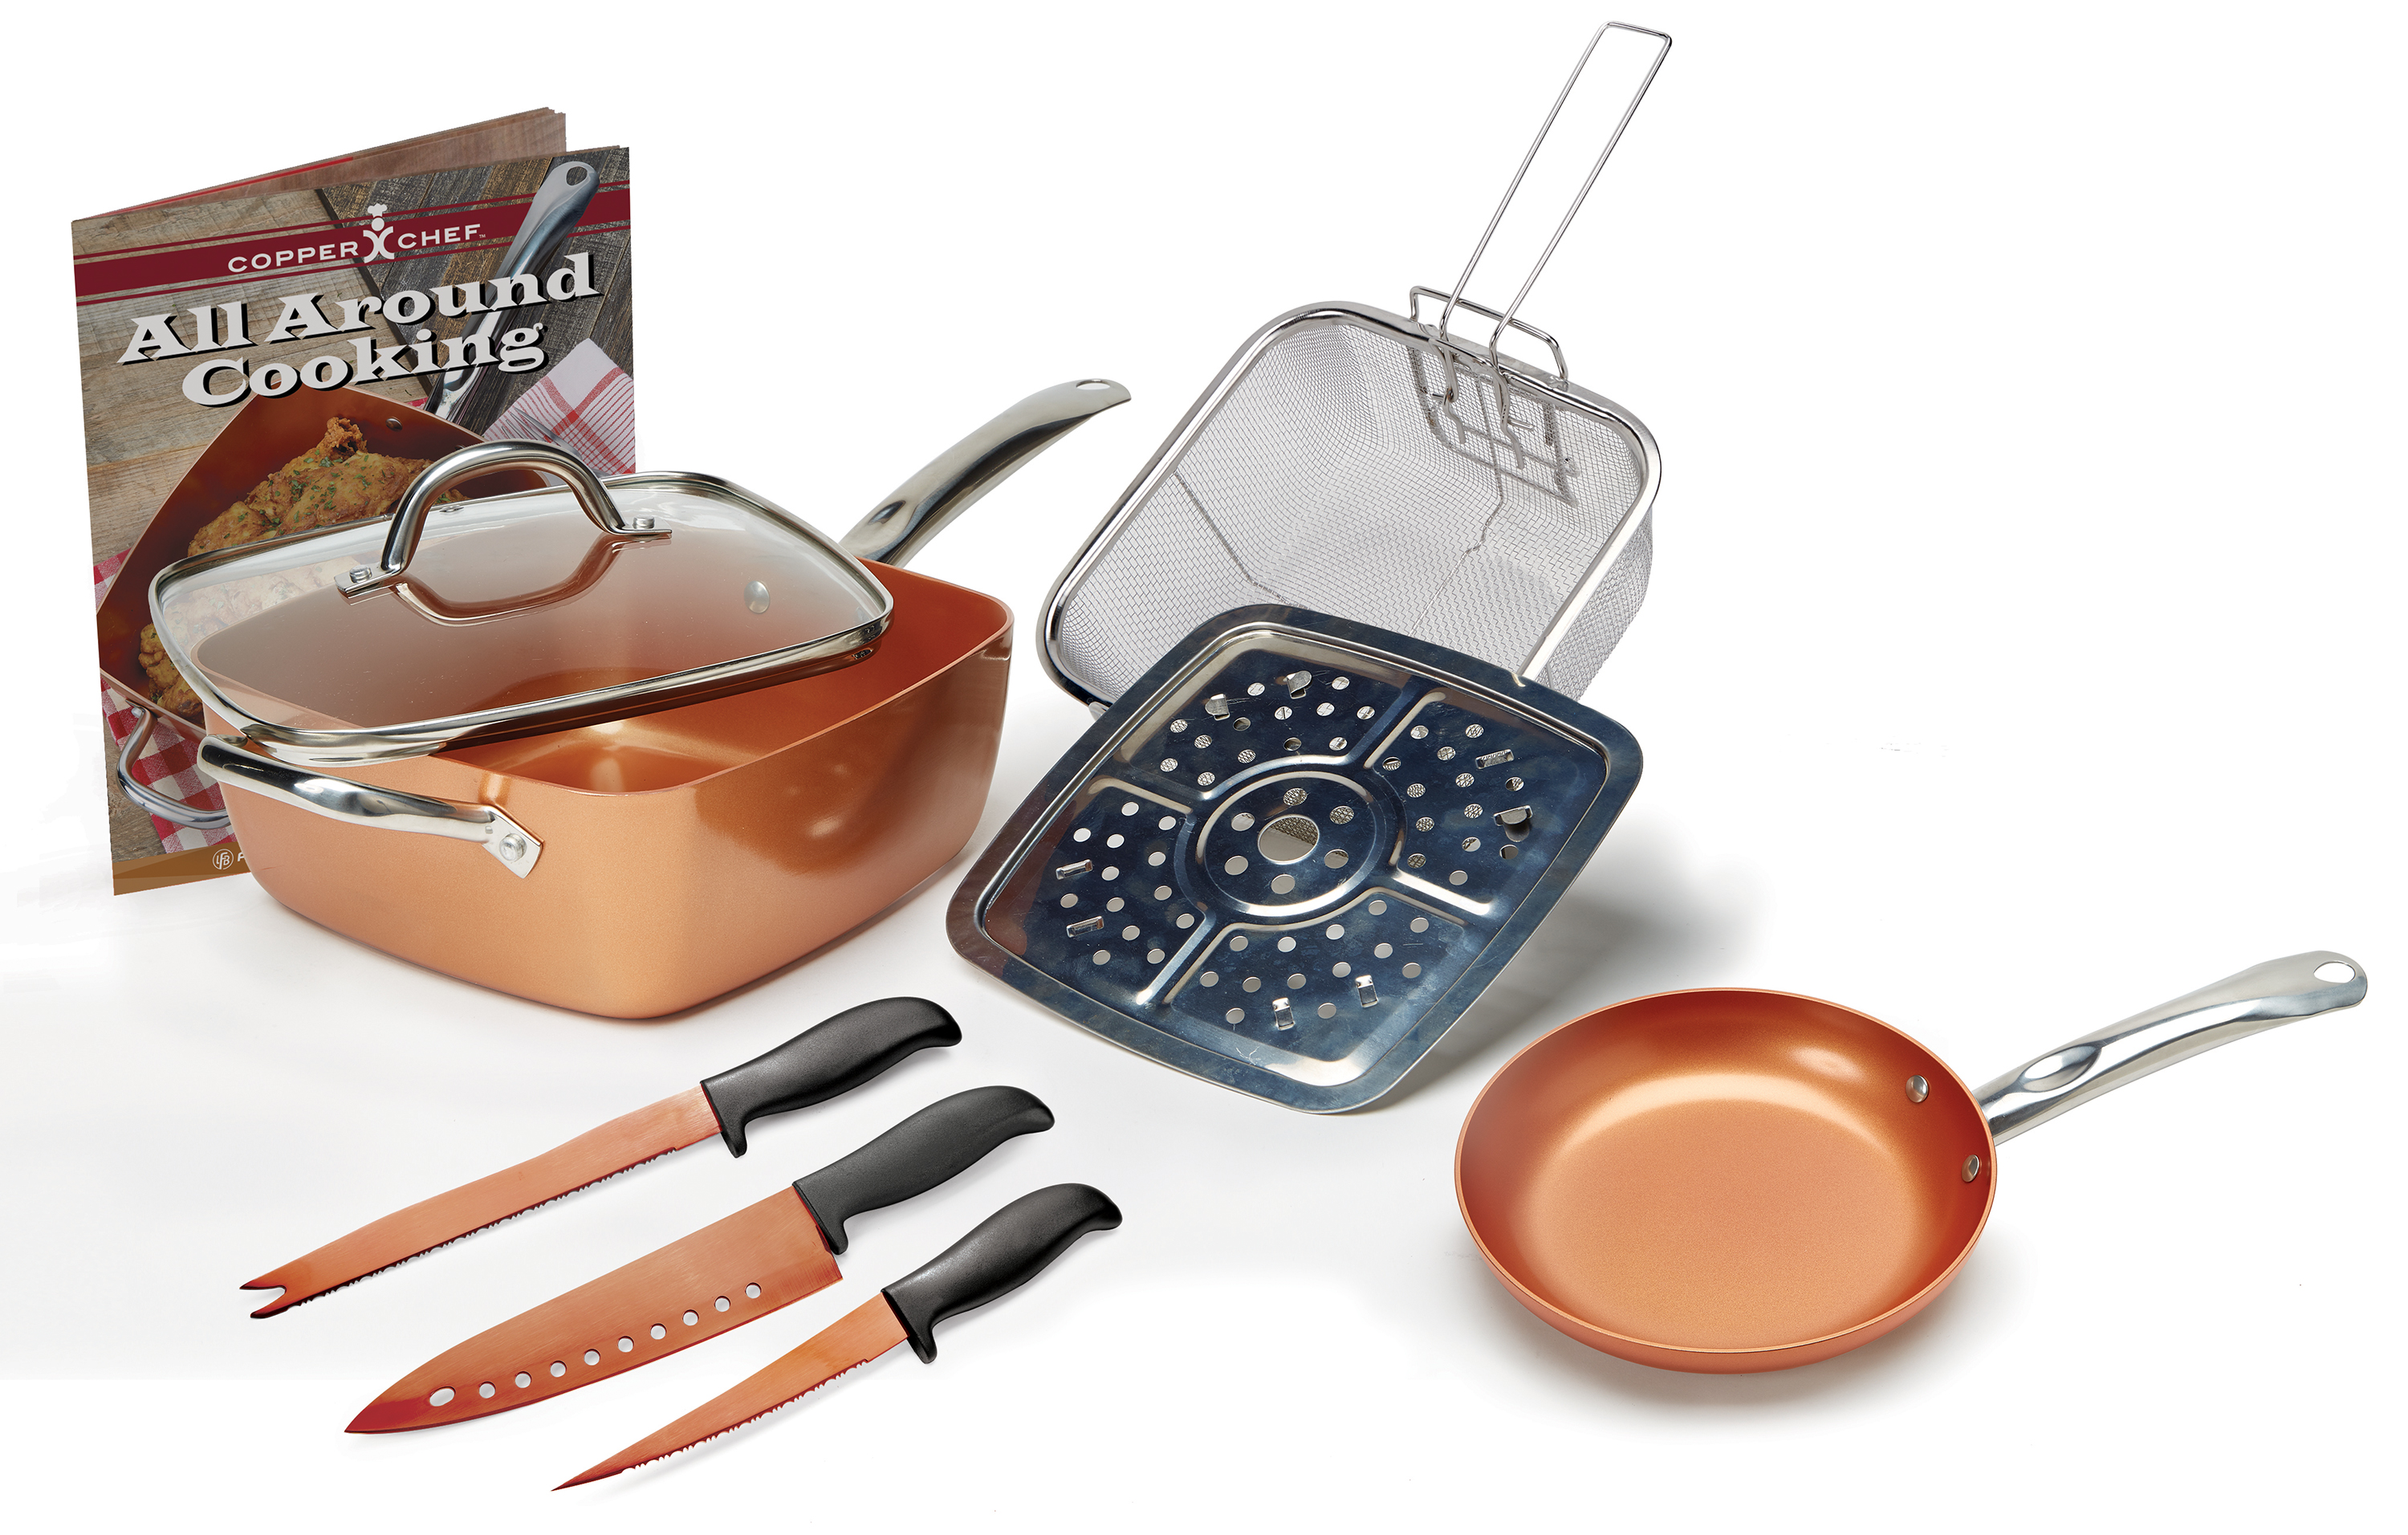 Copper Chef 9 Piece Cookware Set - image 1 of 3